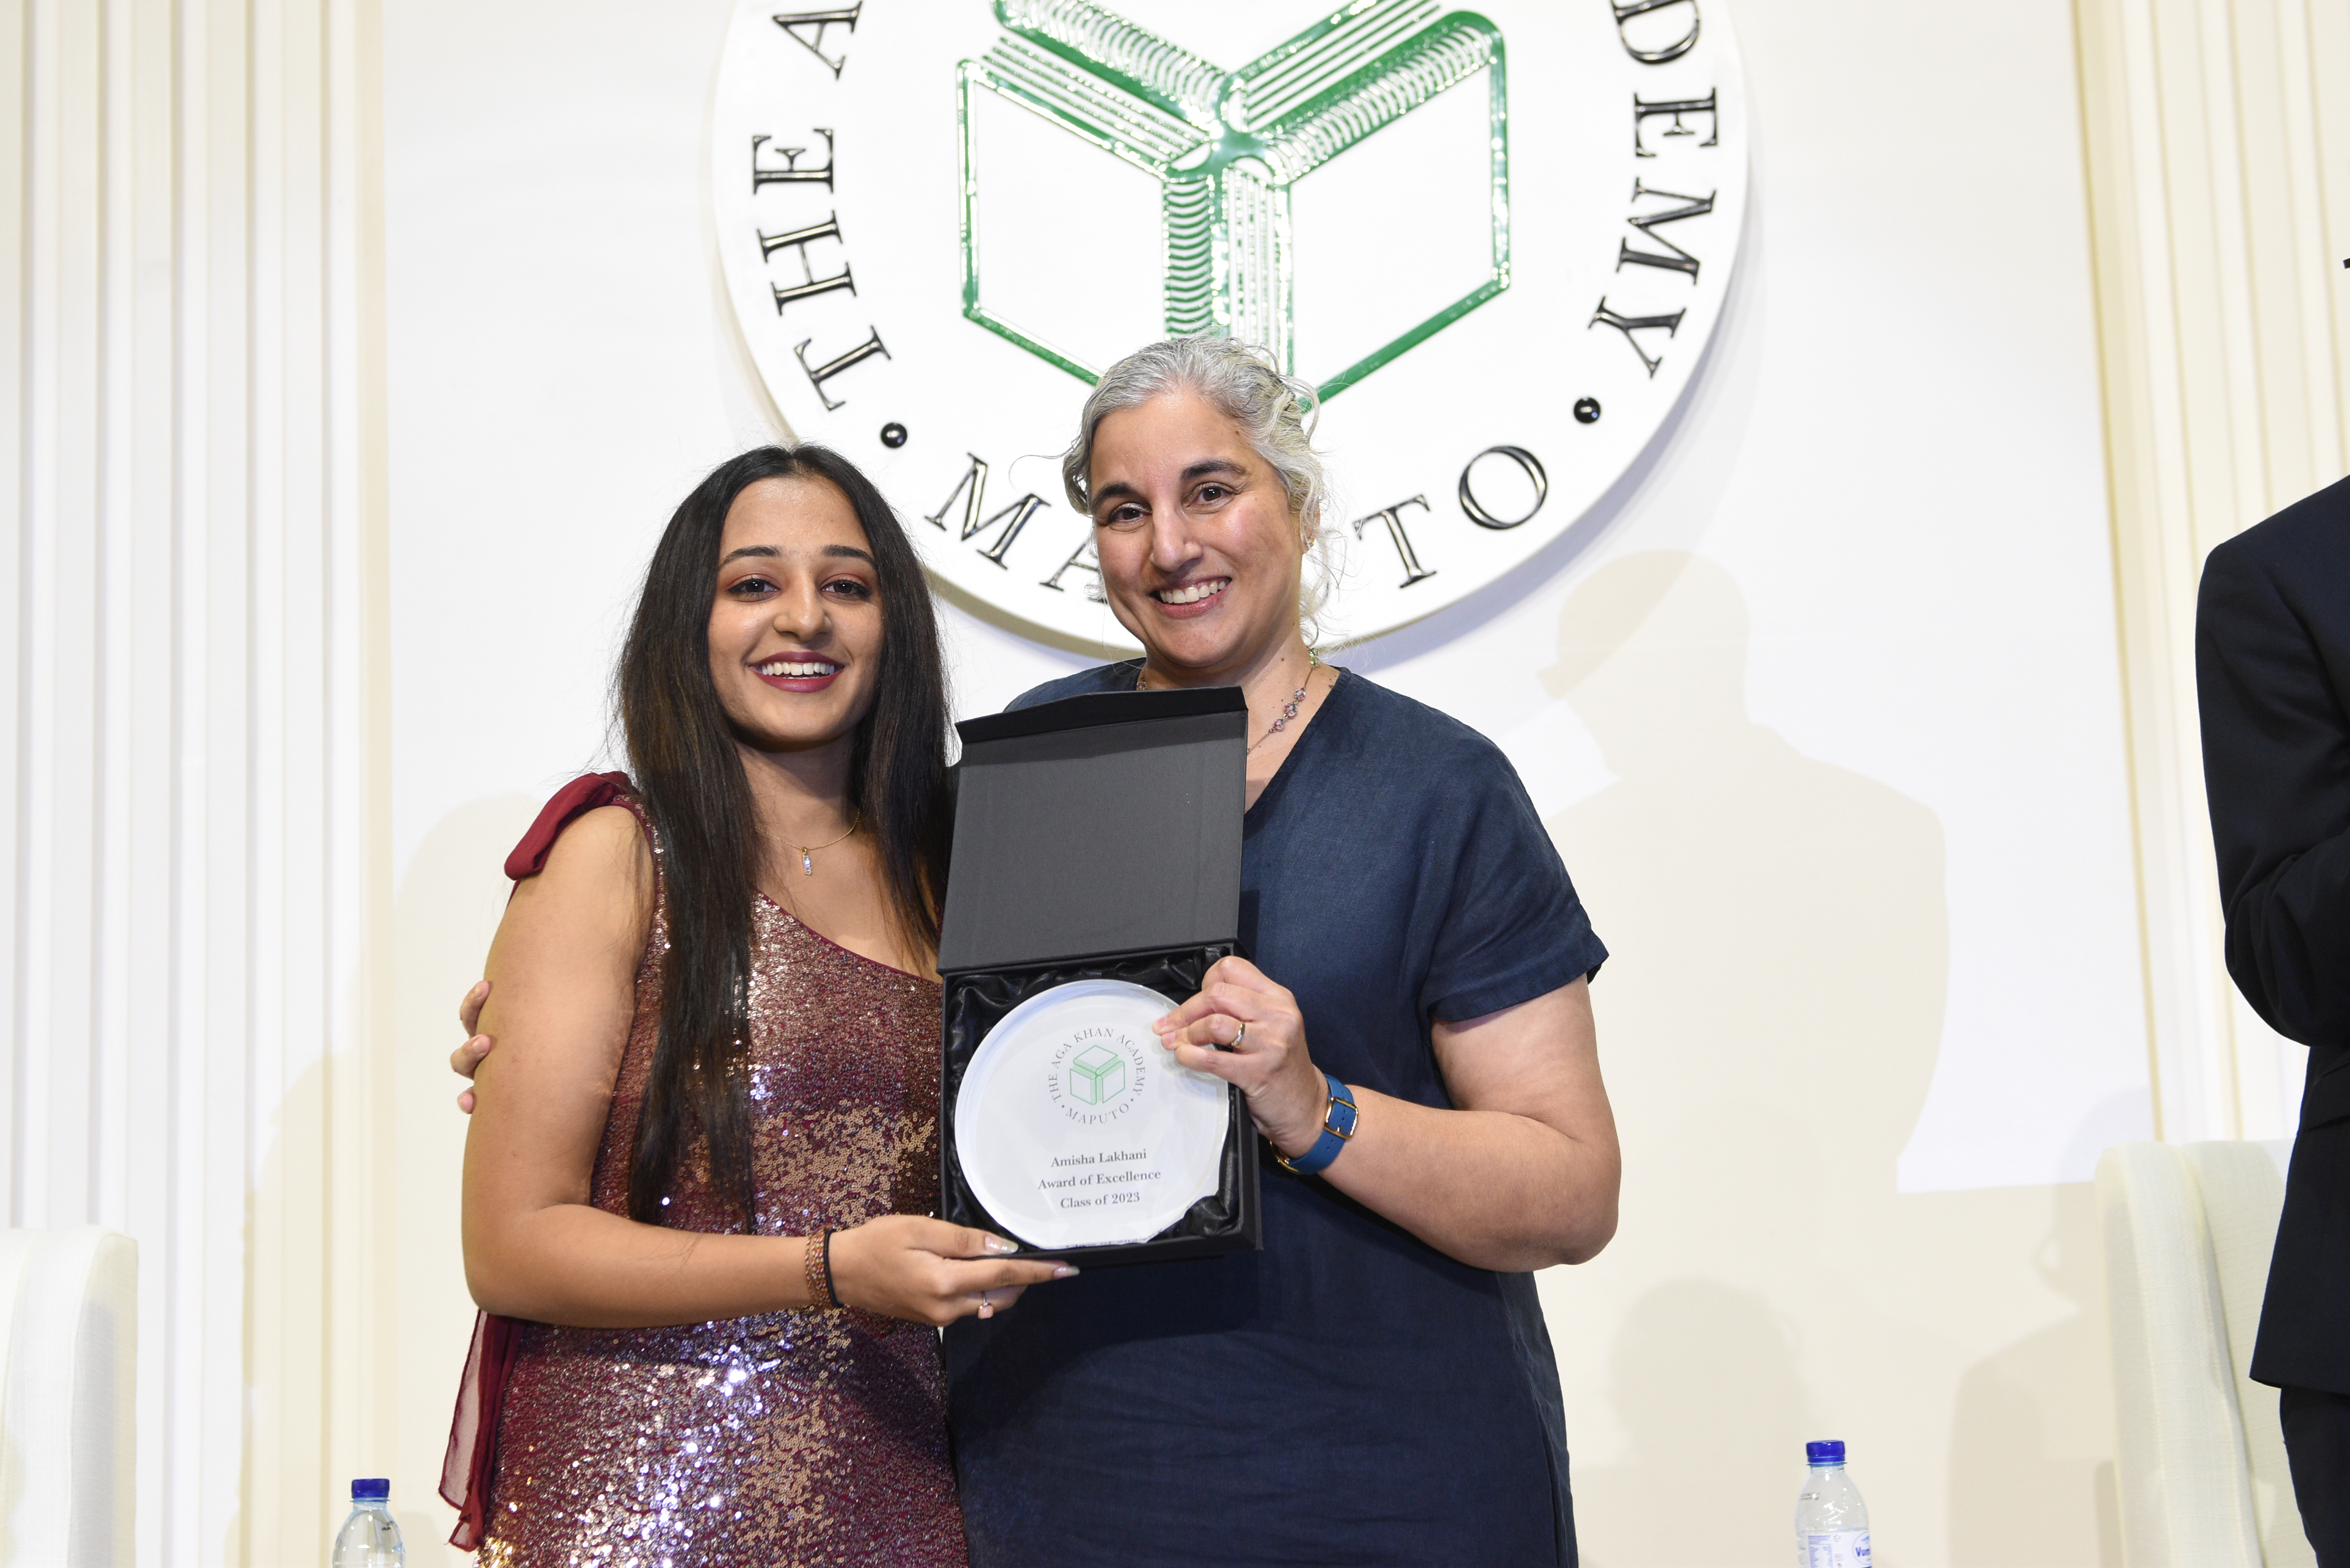 Amisha Lakhani, left, receiving the Award of Excellence from Head of Academy Andrea Spinner.